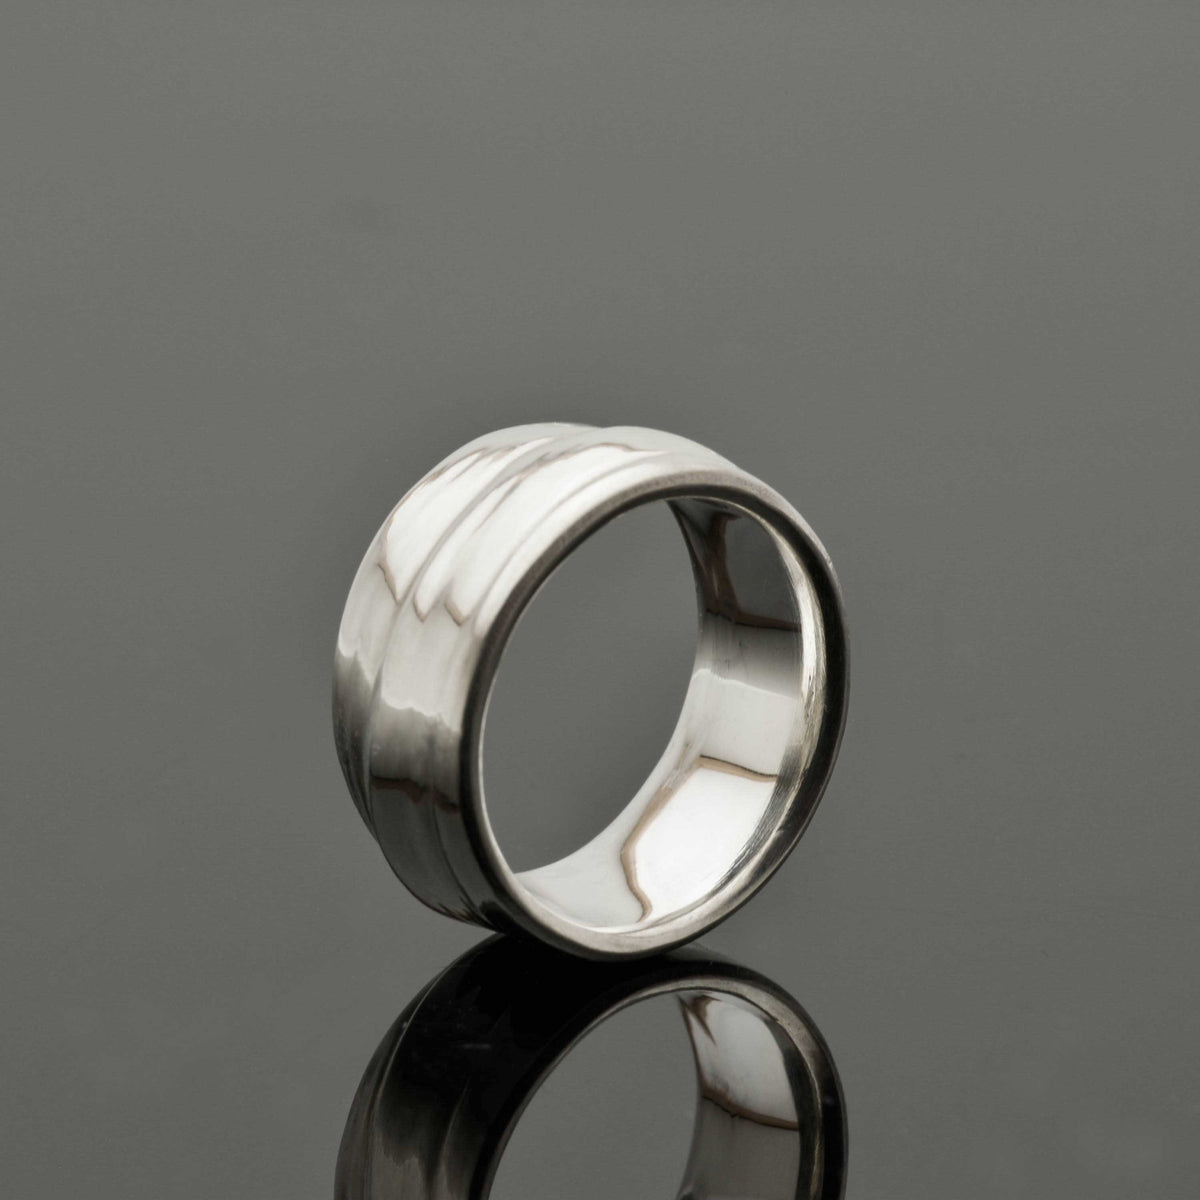 &quot;Wavy Elegance: Sterling Silver Band with a Stunning Pattern Design&quot;